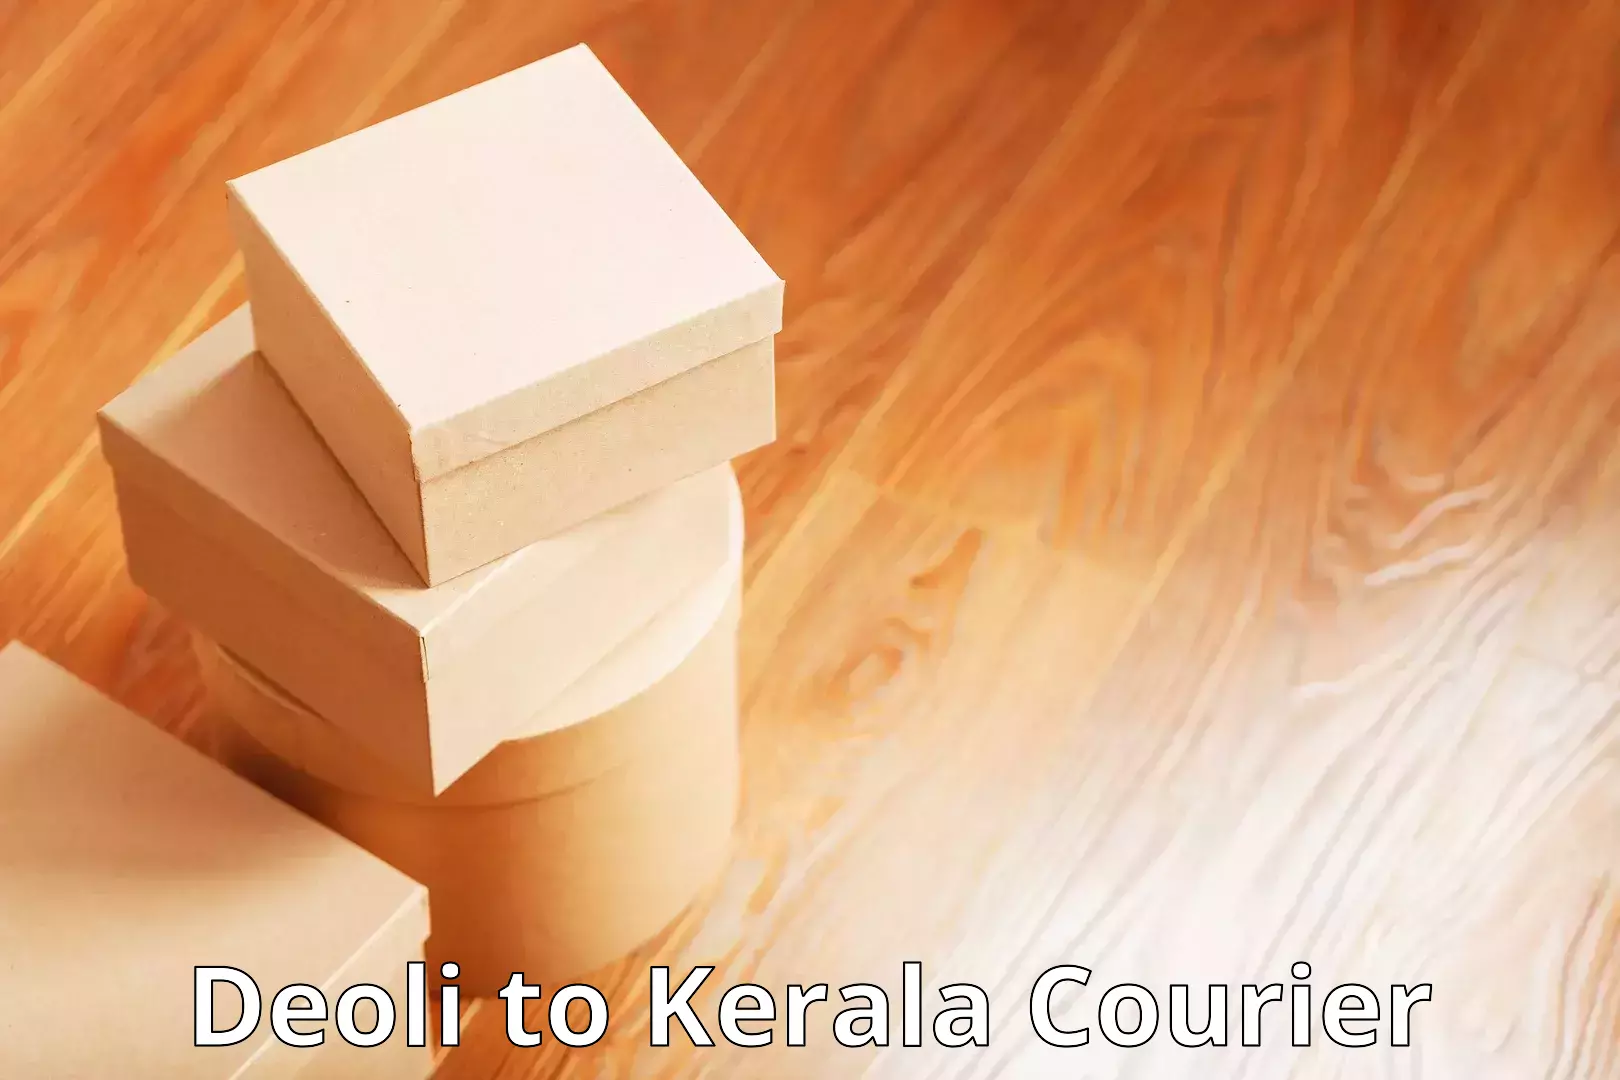 End-to-end delivery Deoli to Kerala